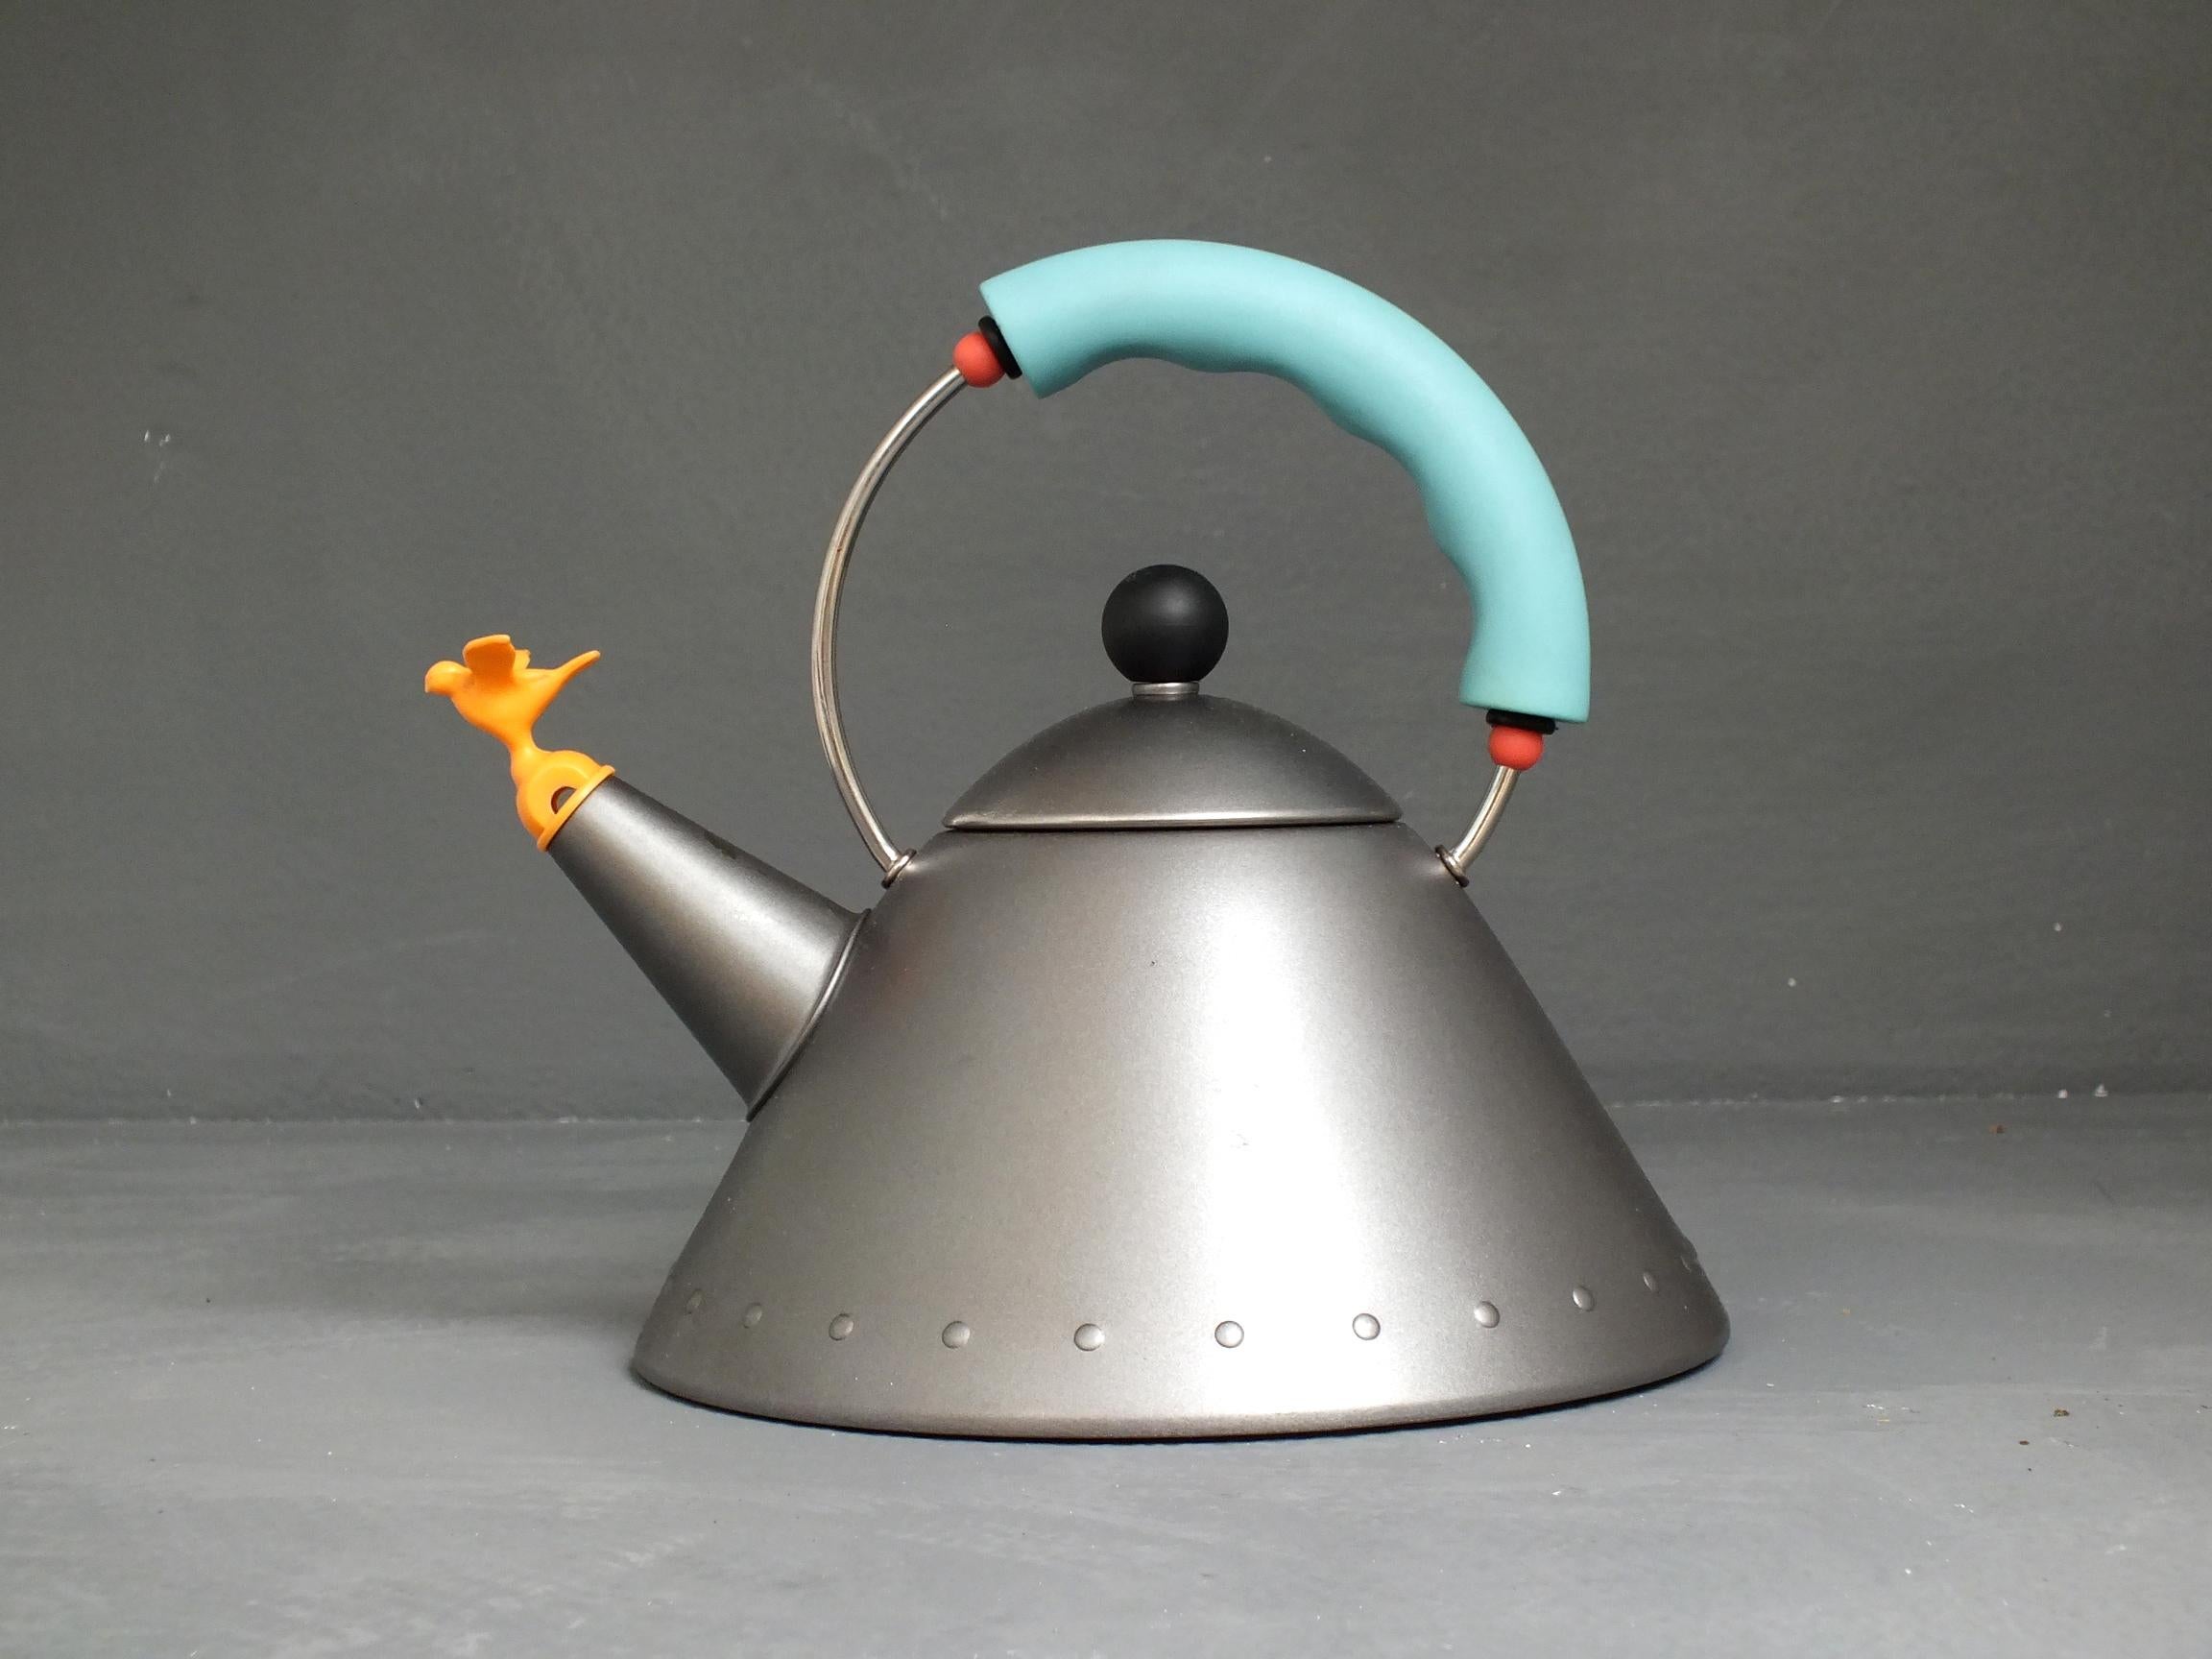 Michael Graves Postmodern tea kettle by Alessi Italy production years 1985 the first
 matte platinum grey enamel body, black knob, orange whistle bird and turquoise
 handle with red app. First edit

 good vintage condition, measure: large 11